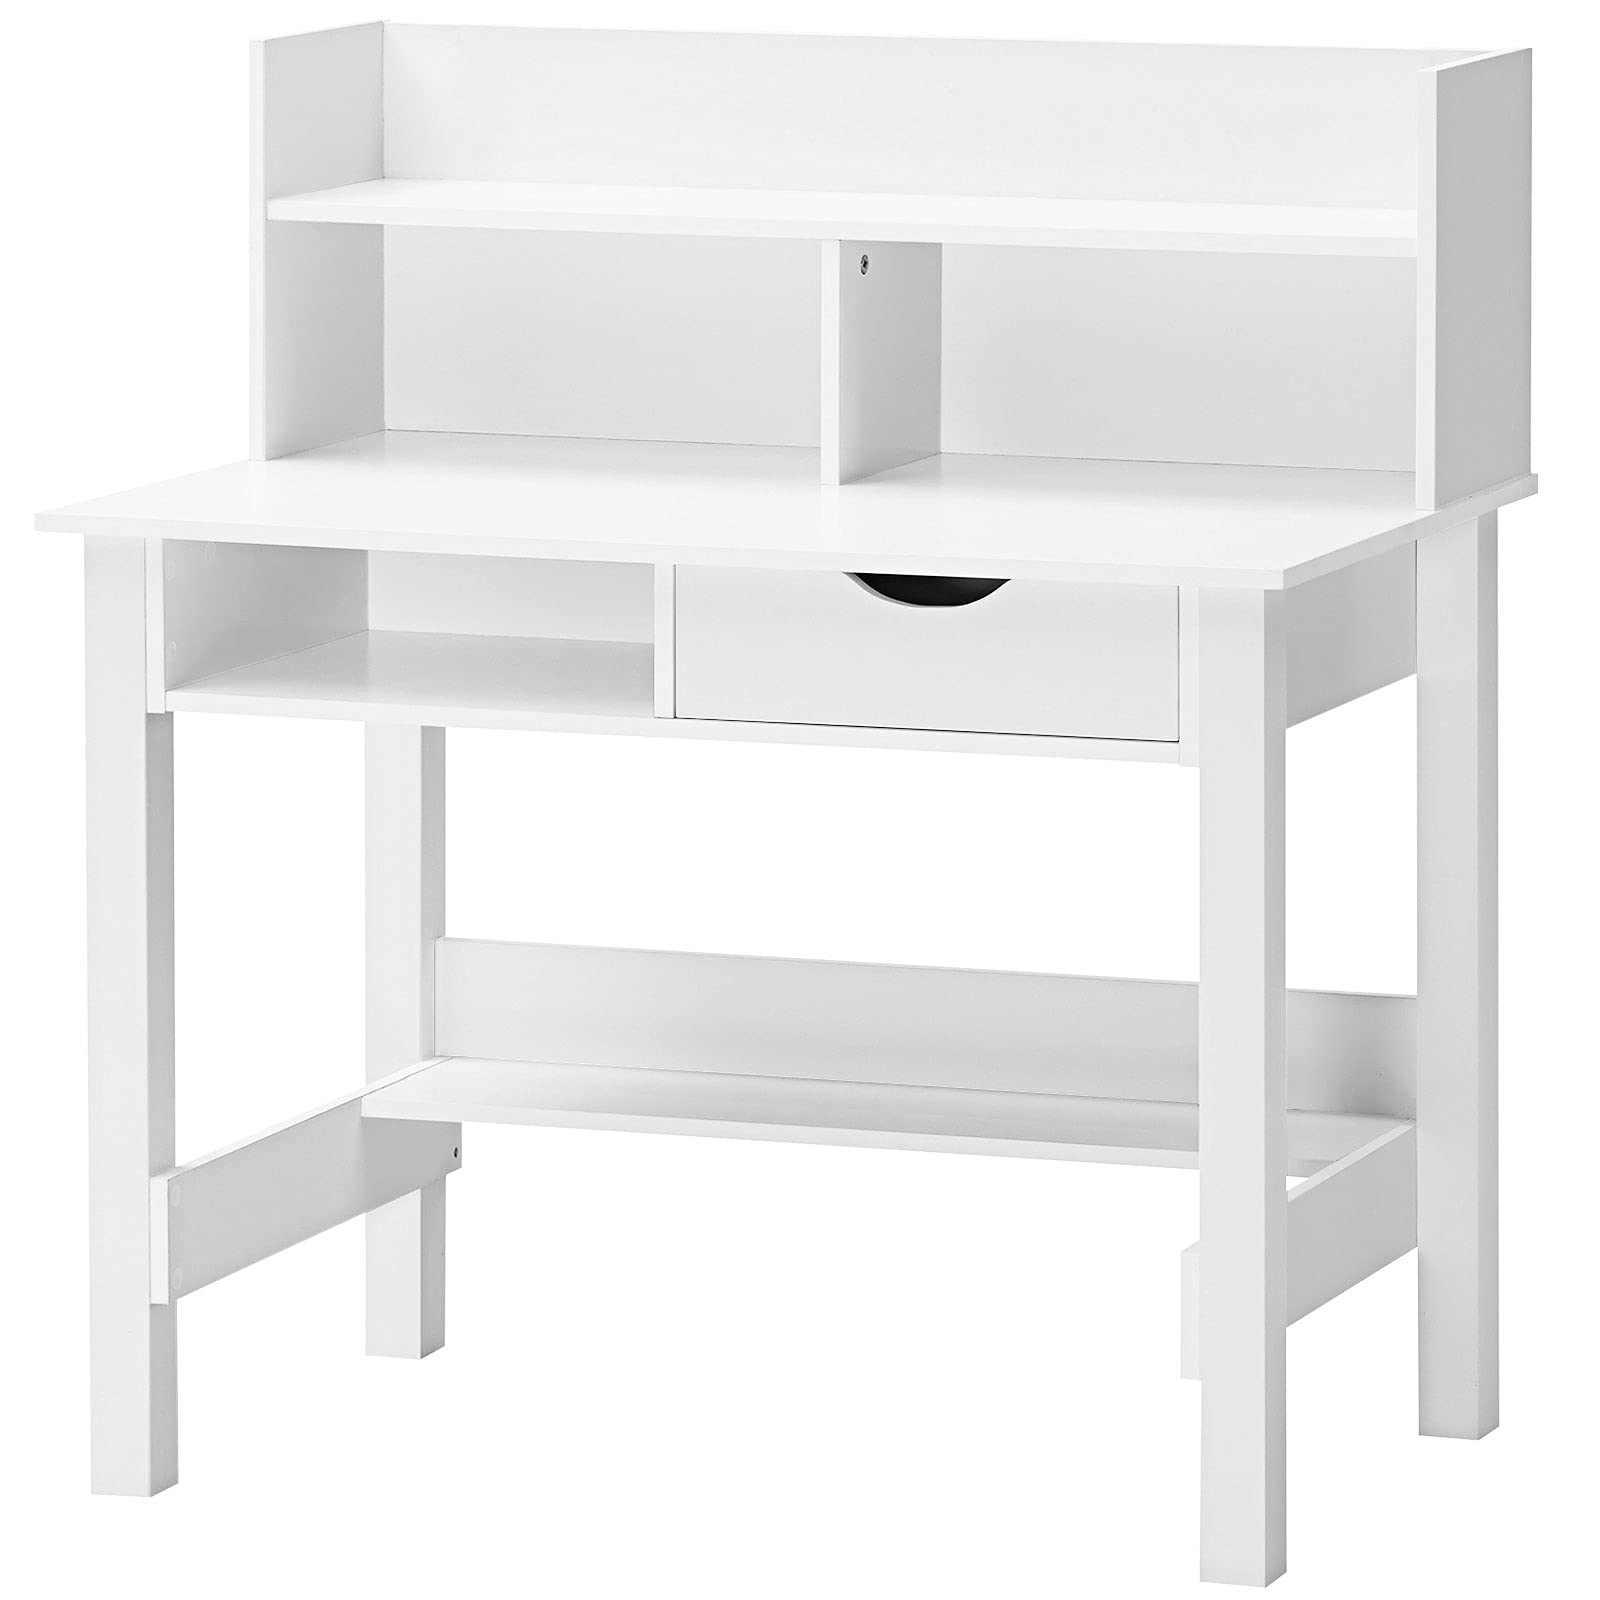 Tangkula White Desk with Storage Drawer & Shelves, Compact Desk